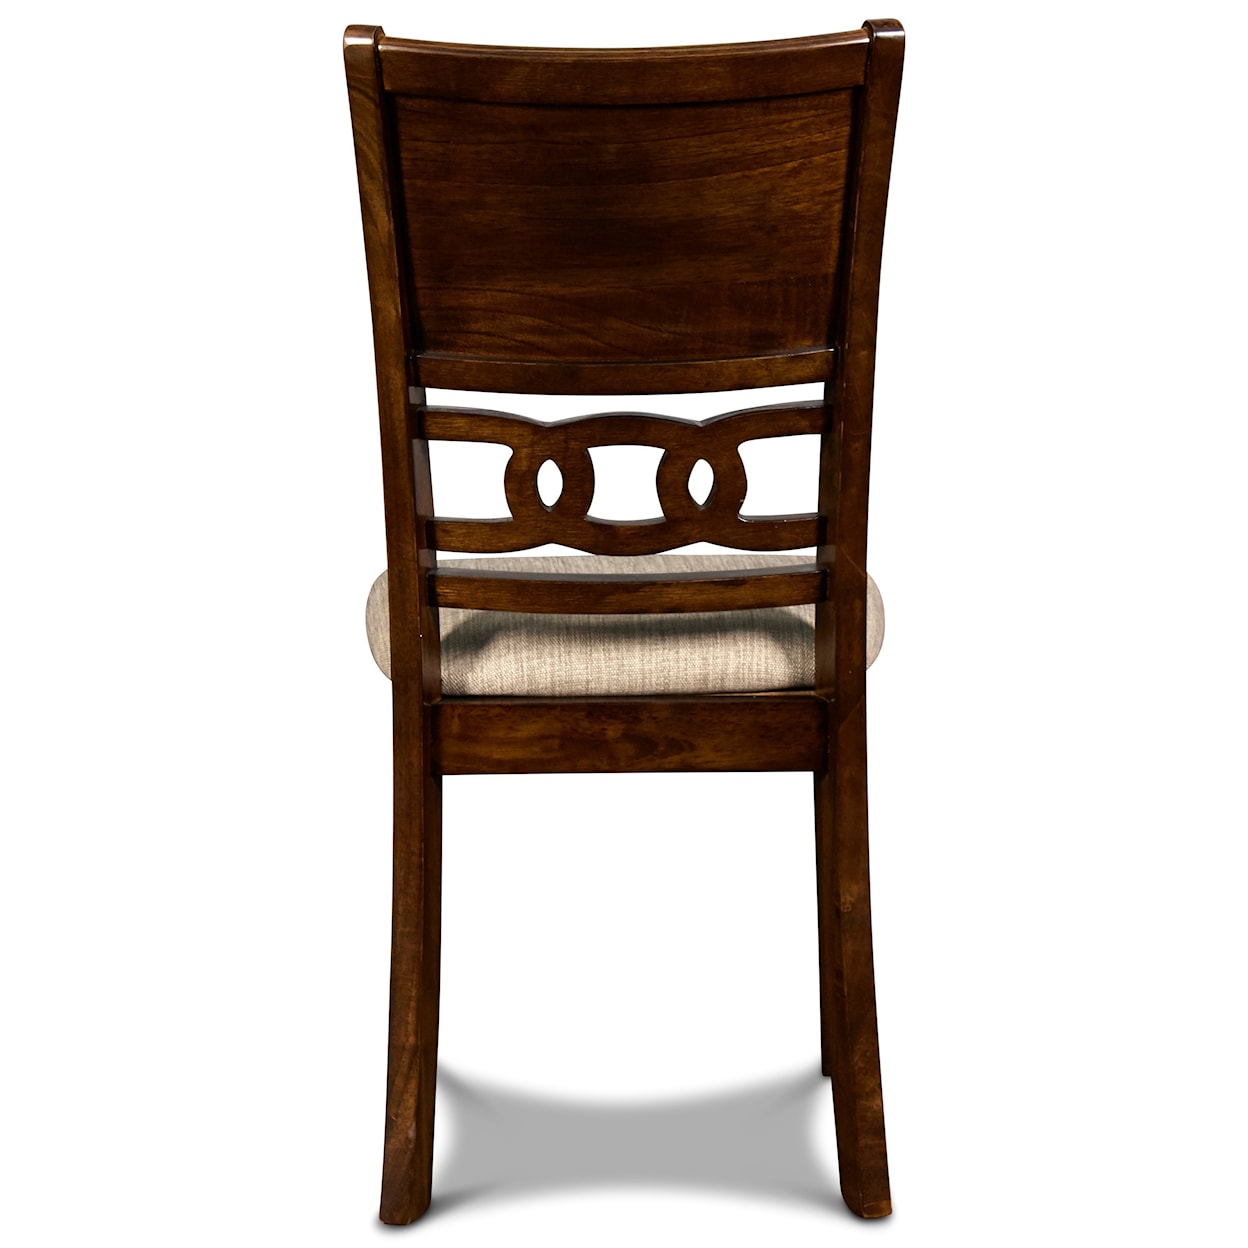 New Classic Gia Dining Chair